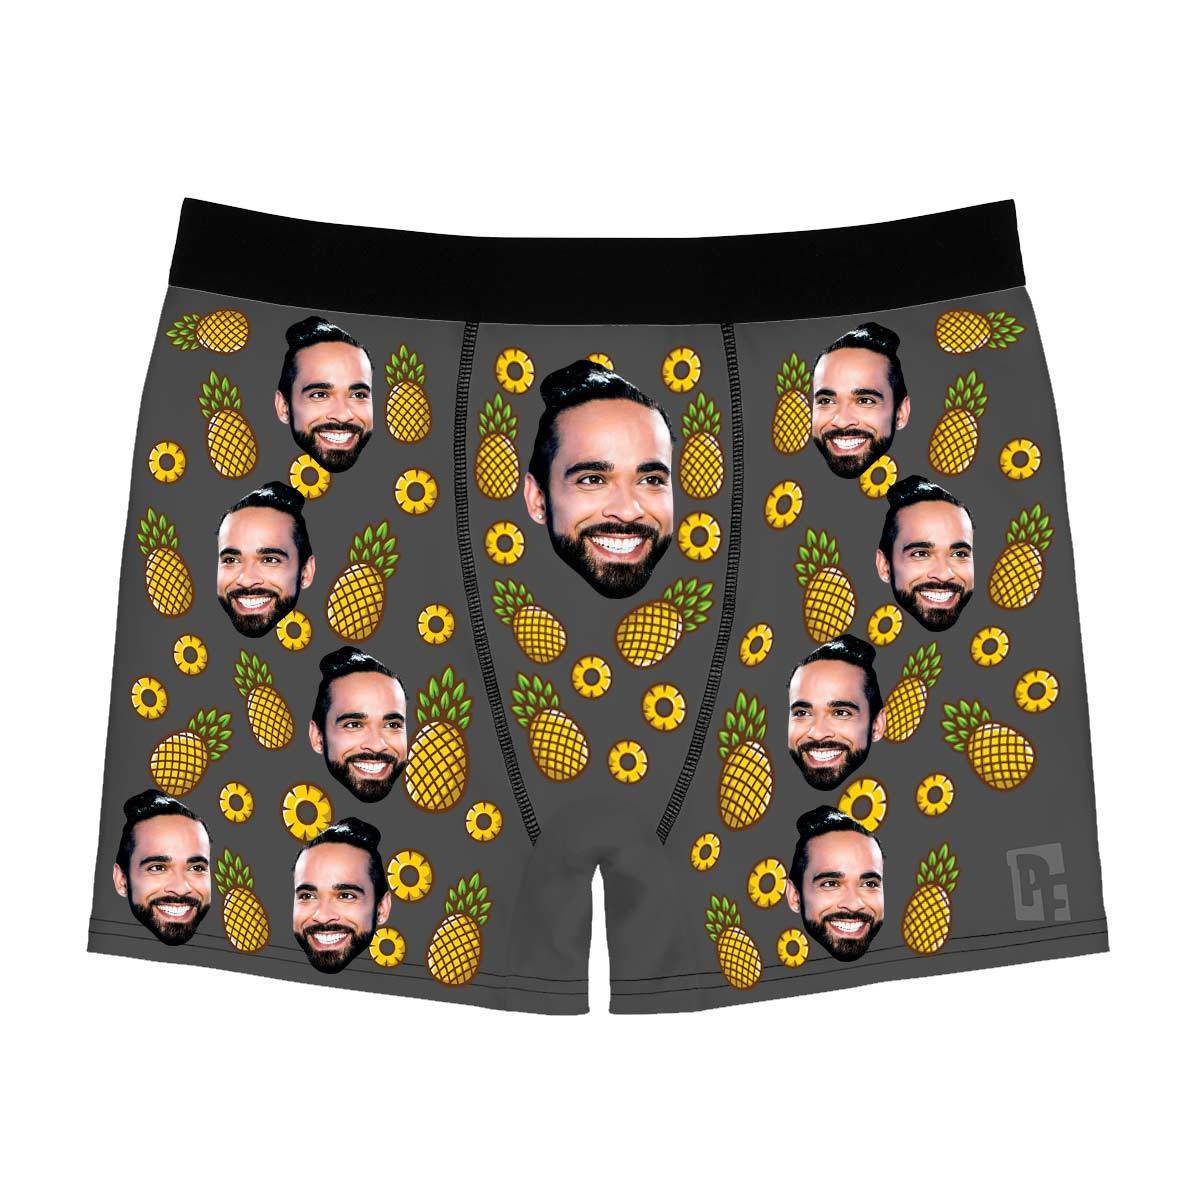 Dark Fruits men's boxer briefs personalized with photo printed on them